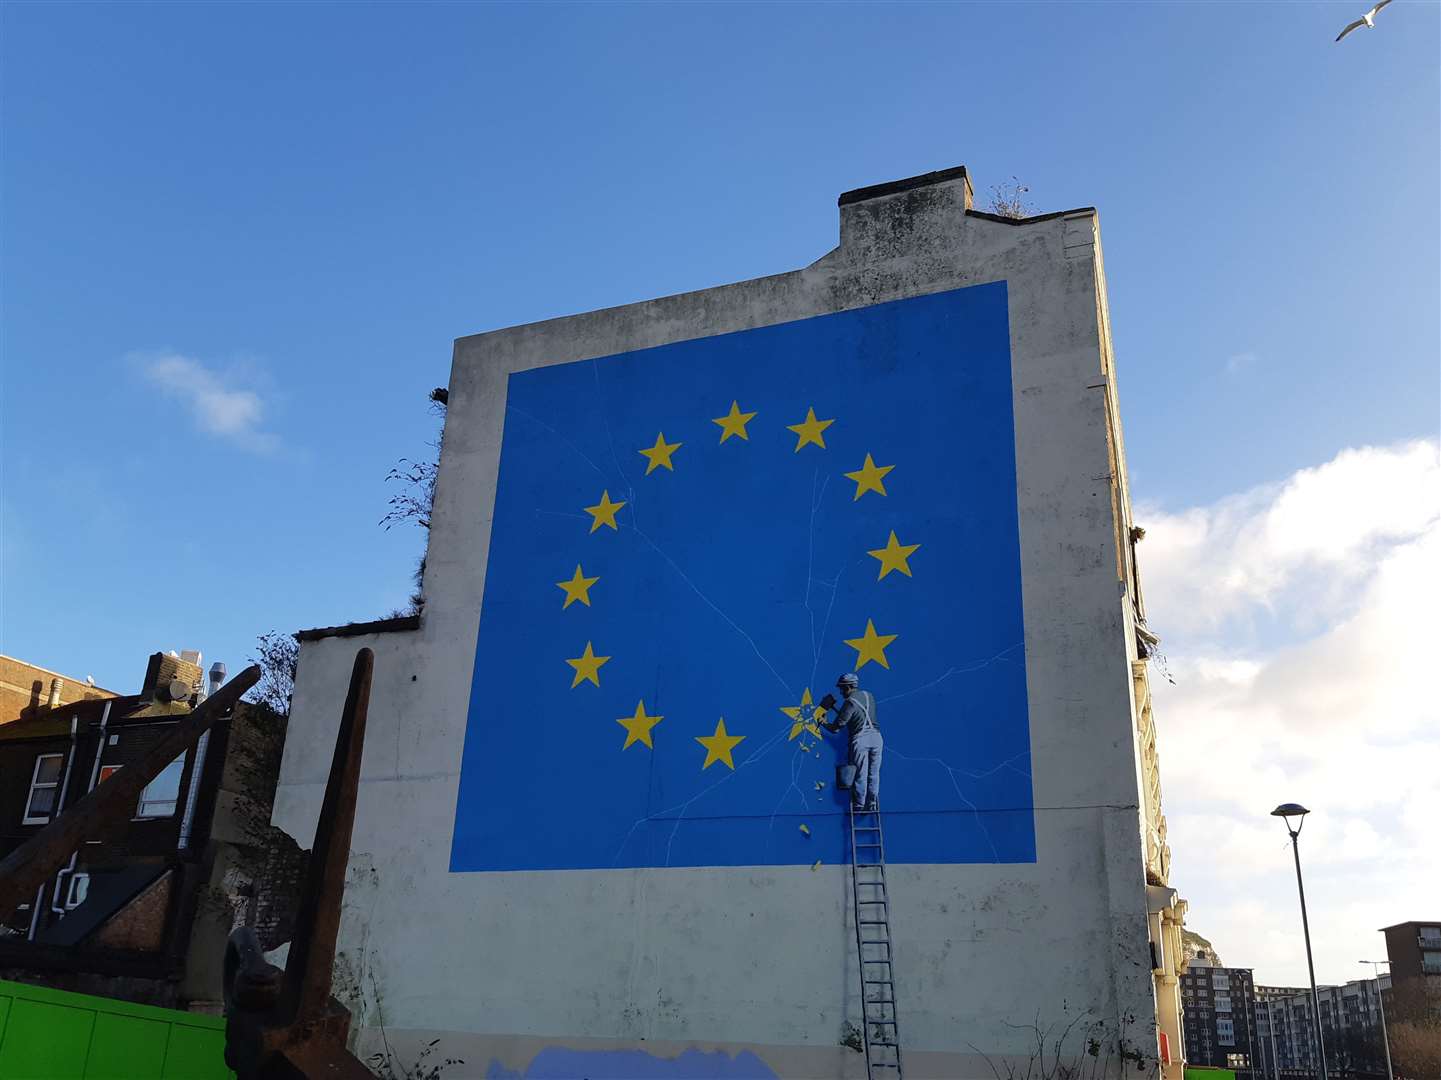 How the Banksy mural looked